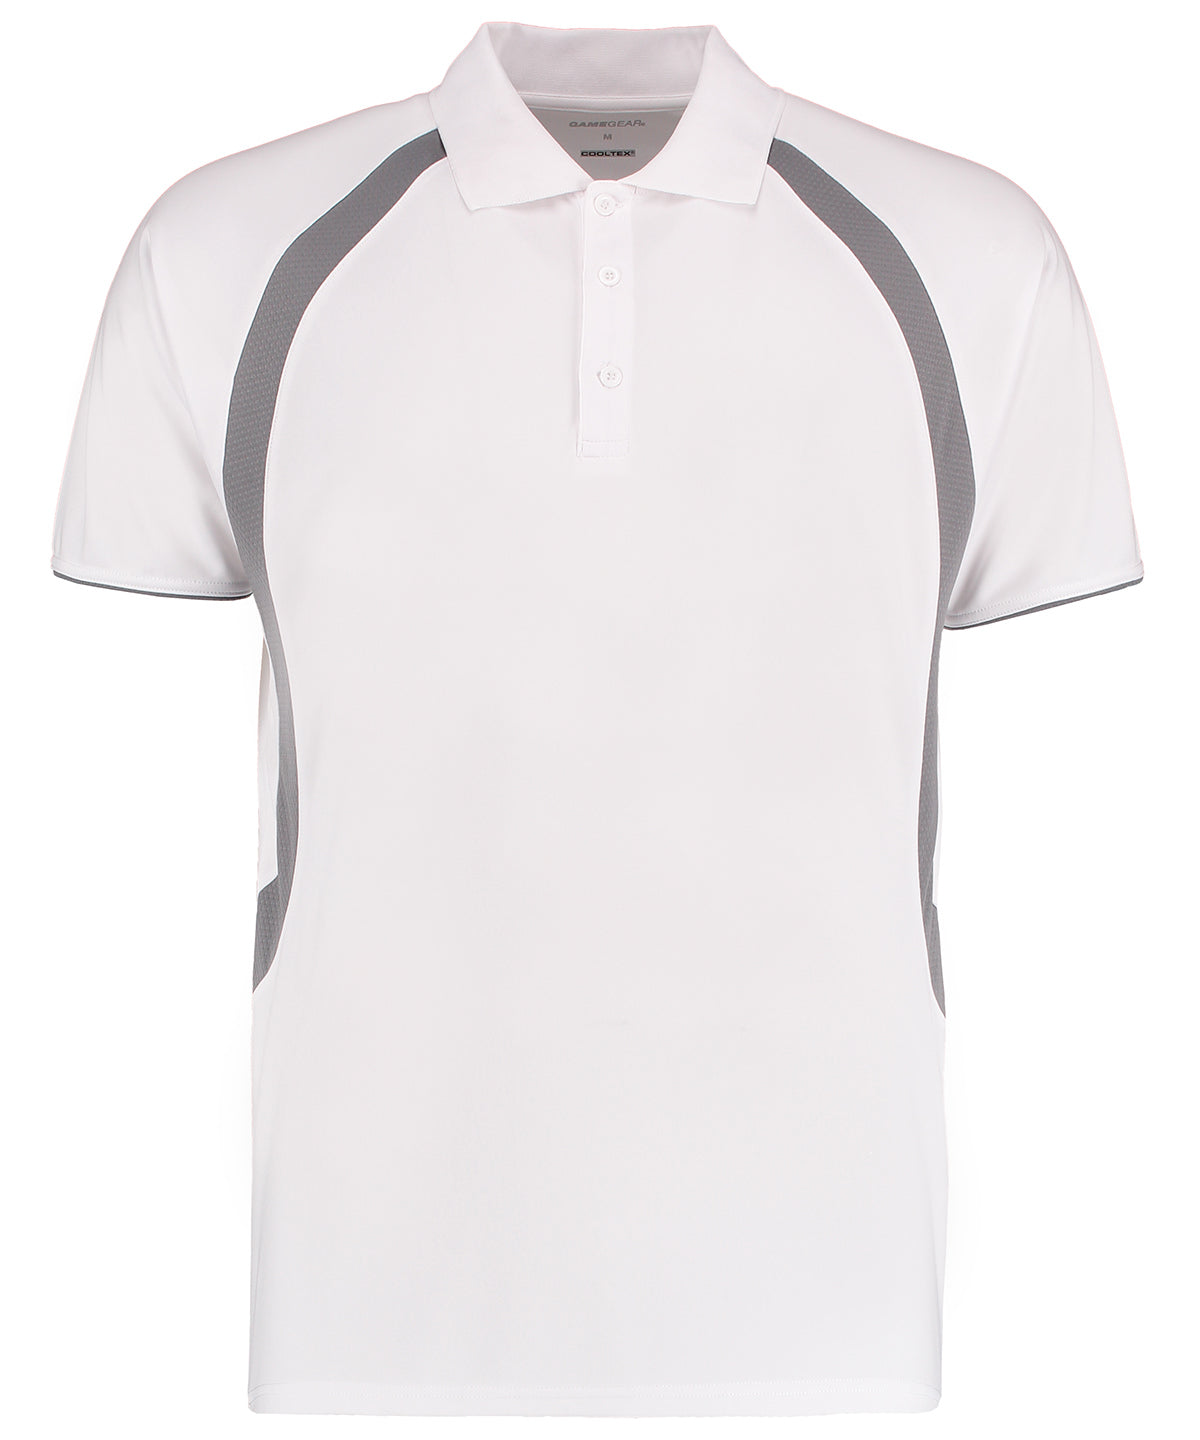 Personalised Polo Shirts - White GameGear Gamegear® Cooltex® riviera polo shirt (classic fit)